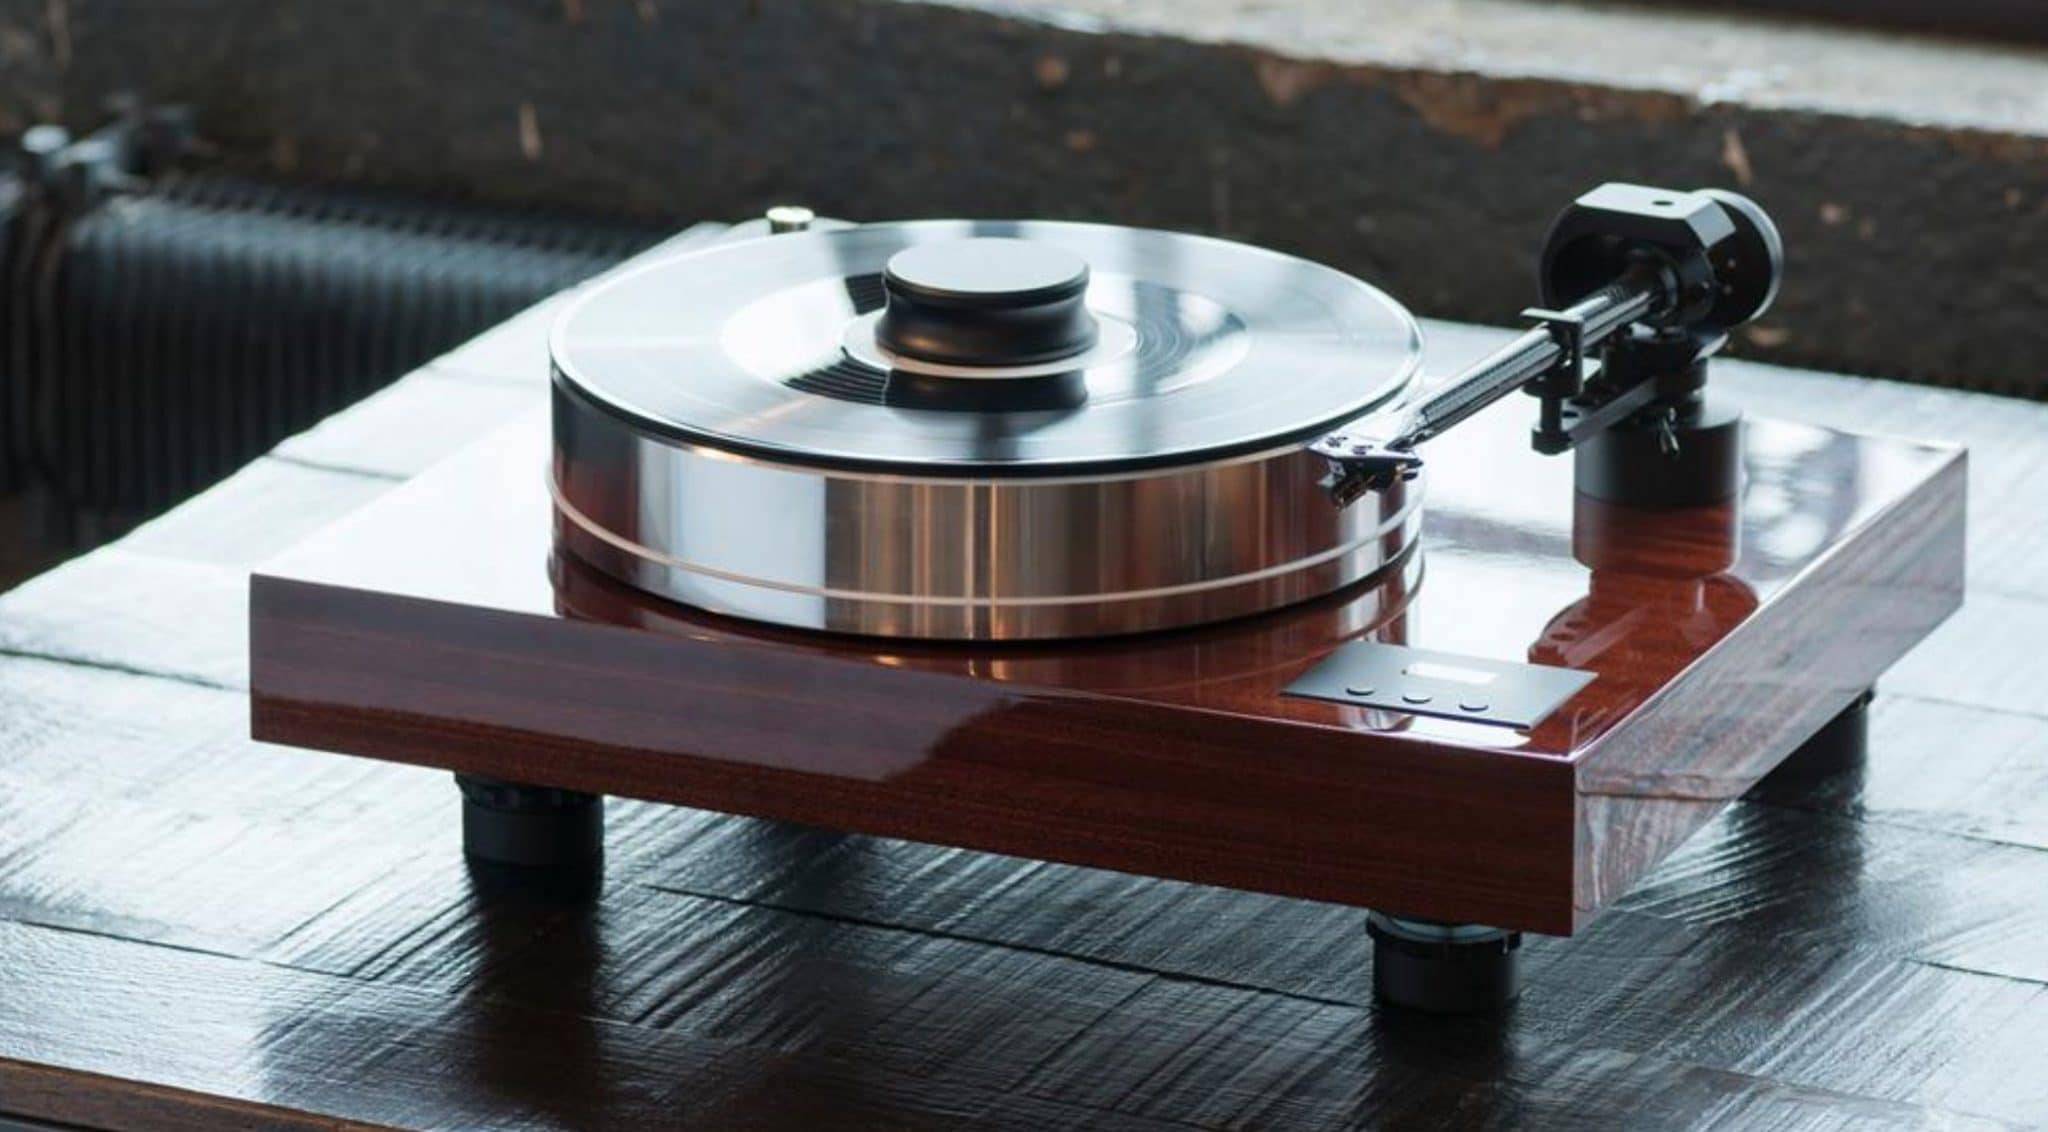 Pro-ject Xtension 10